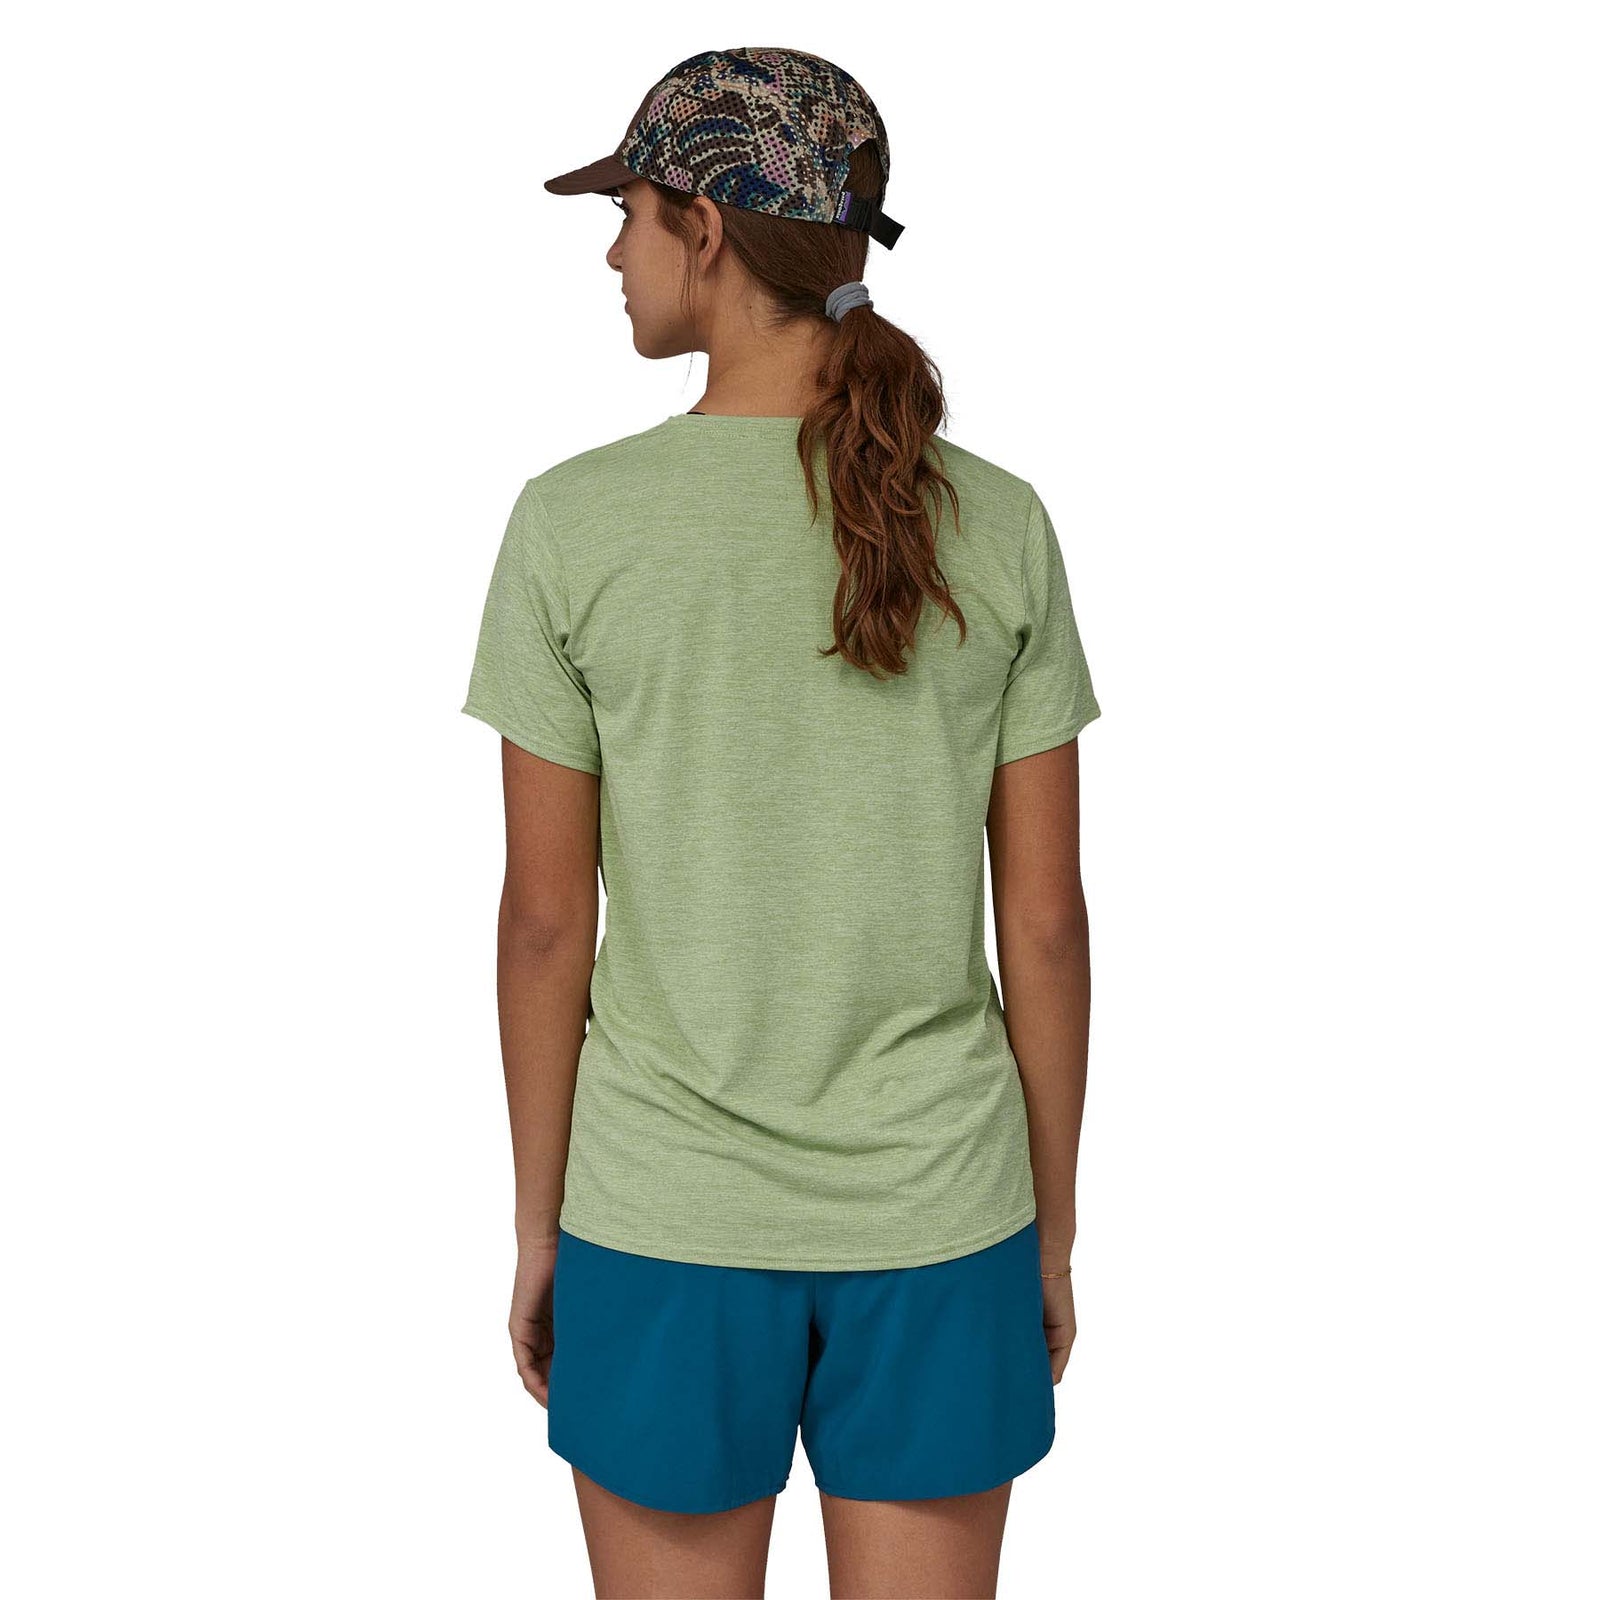 Patagonia Women's Multi Trails Shorts - 5 1/2 in. 2023 